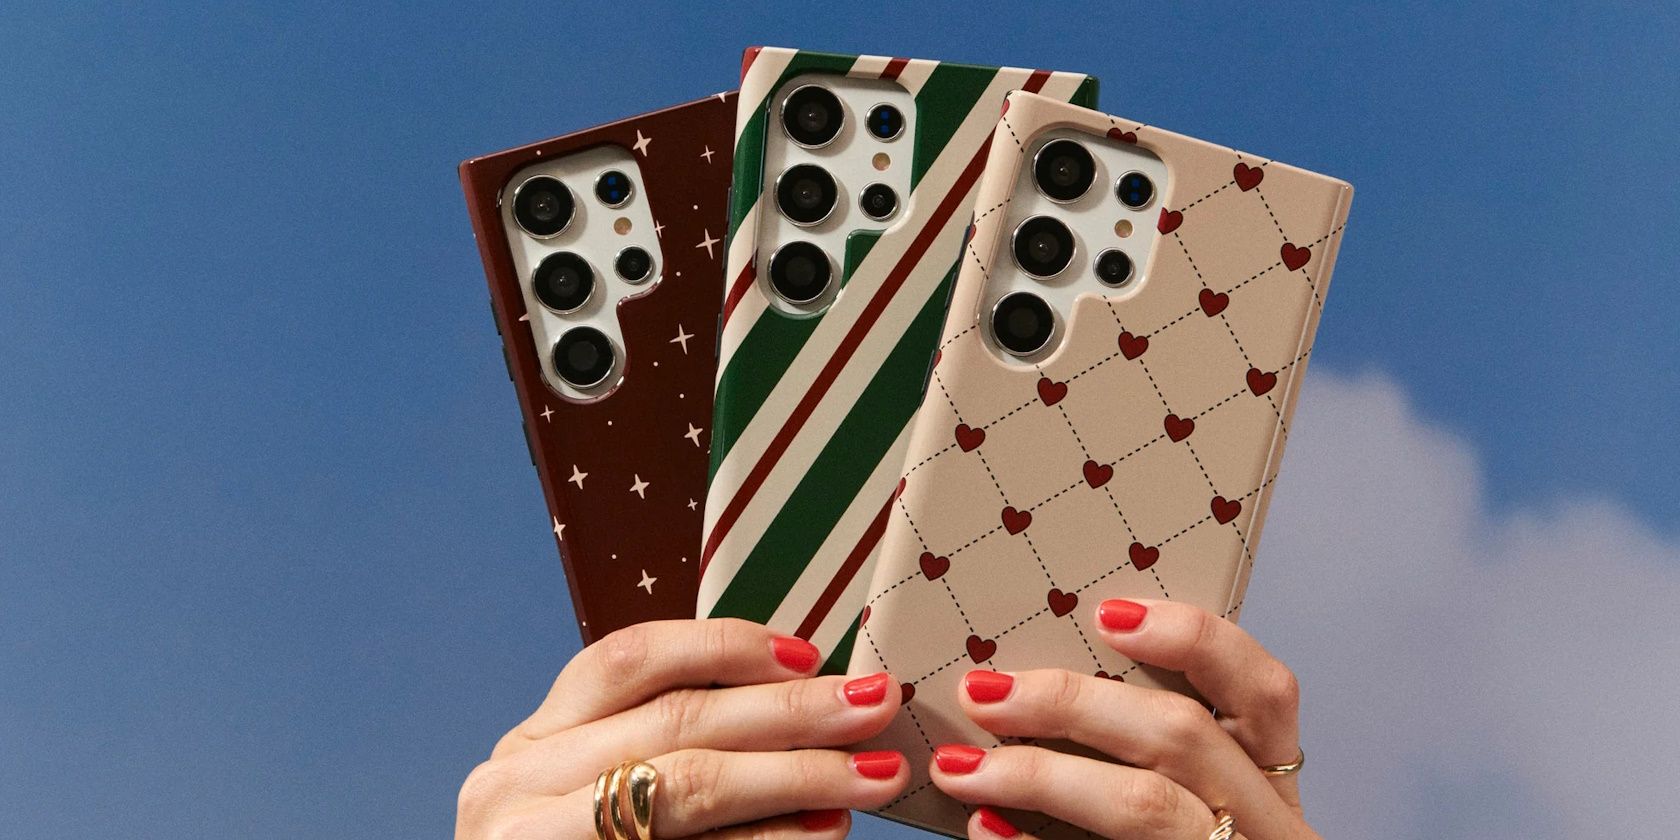 burga smartphone cases in woman's hand with red fingernails